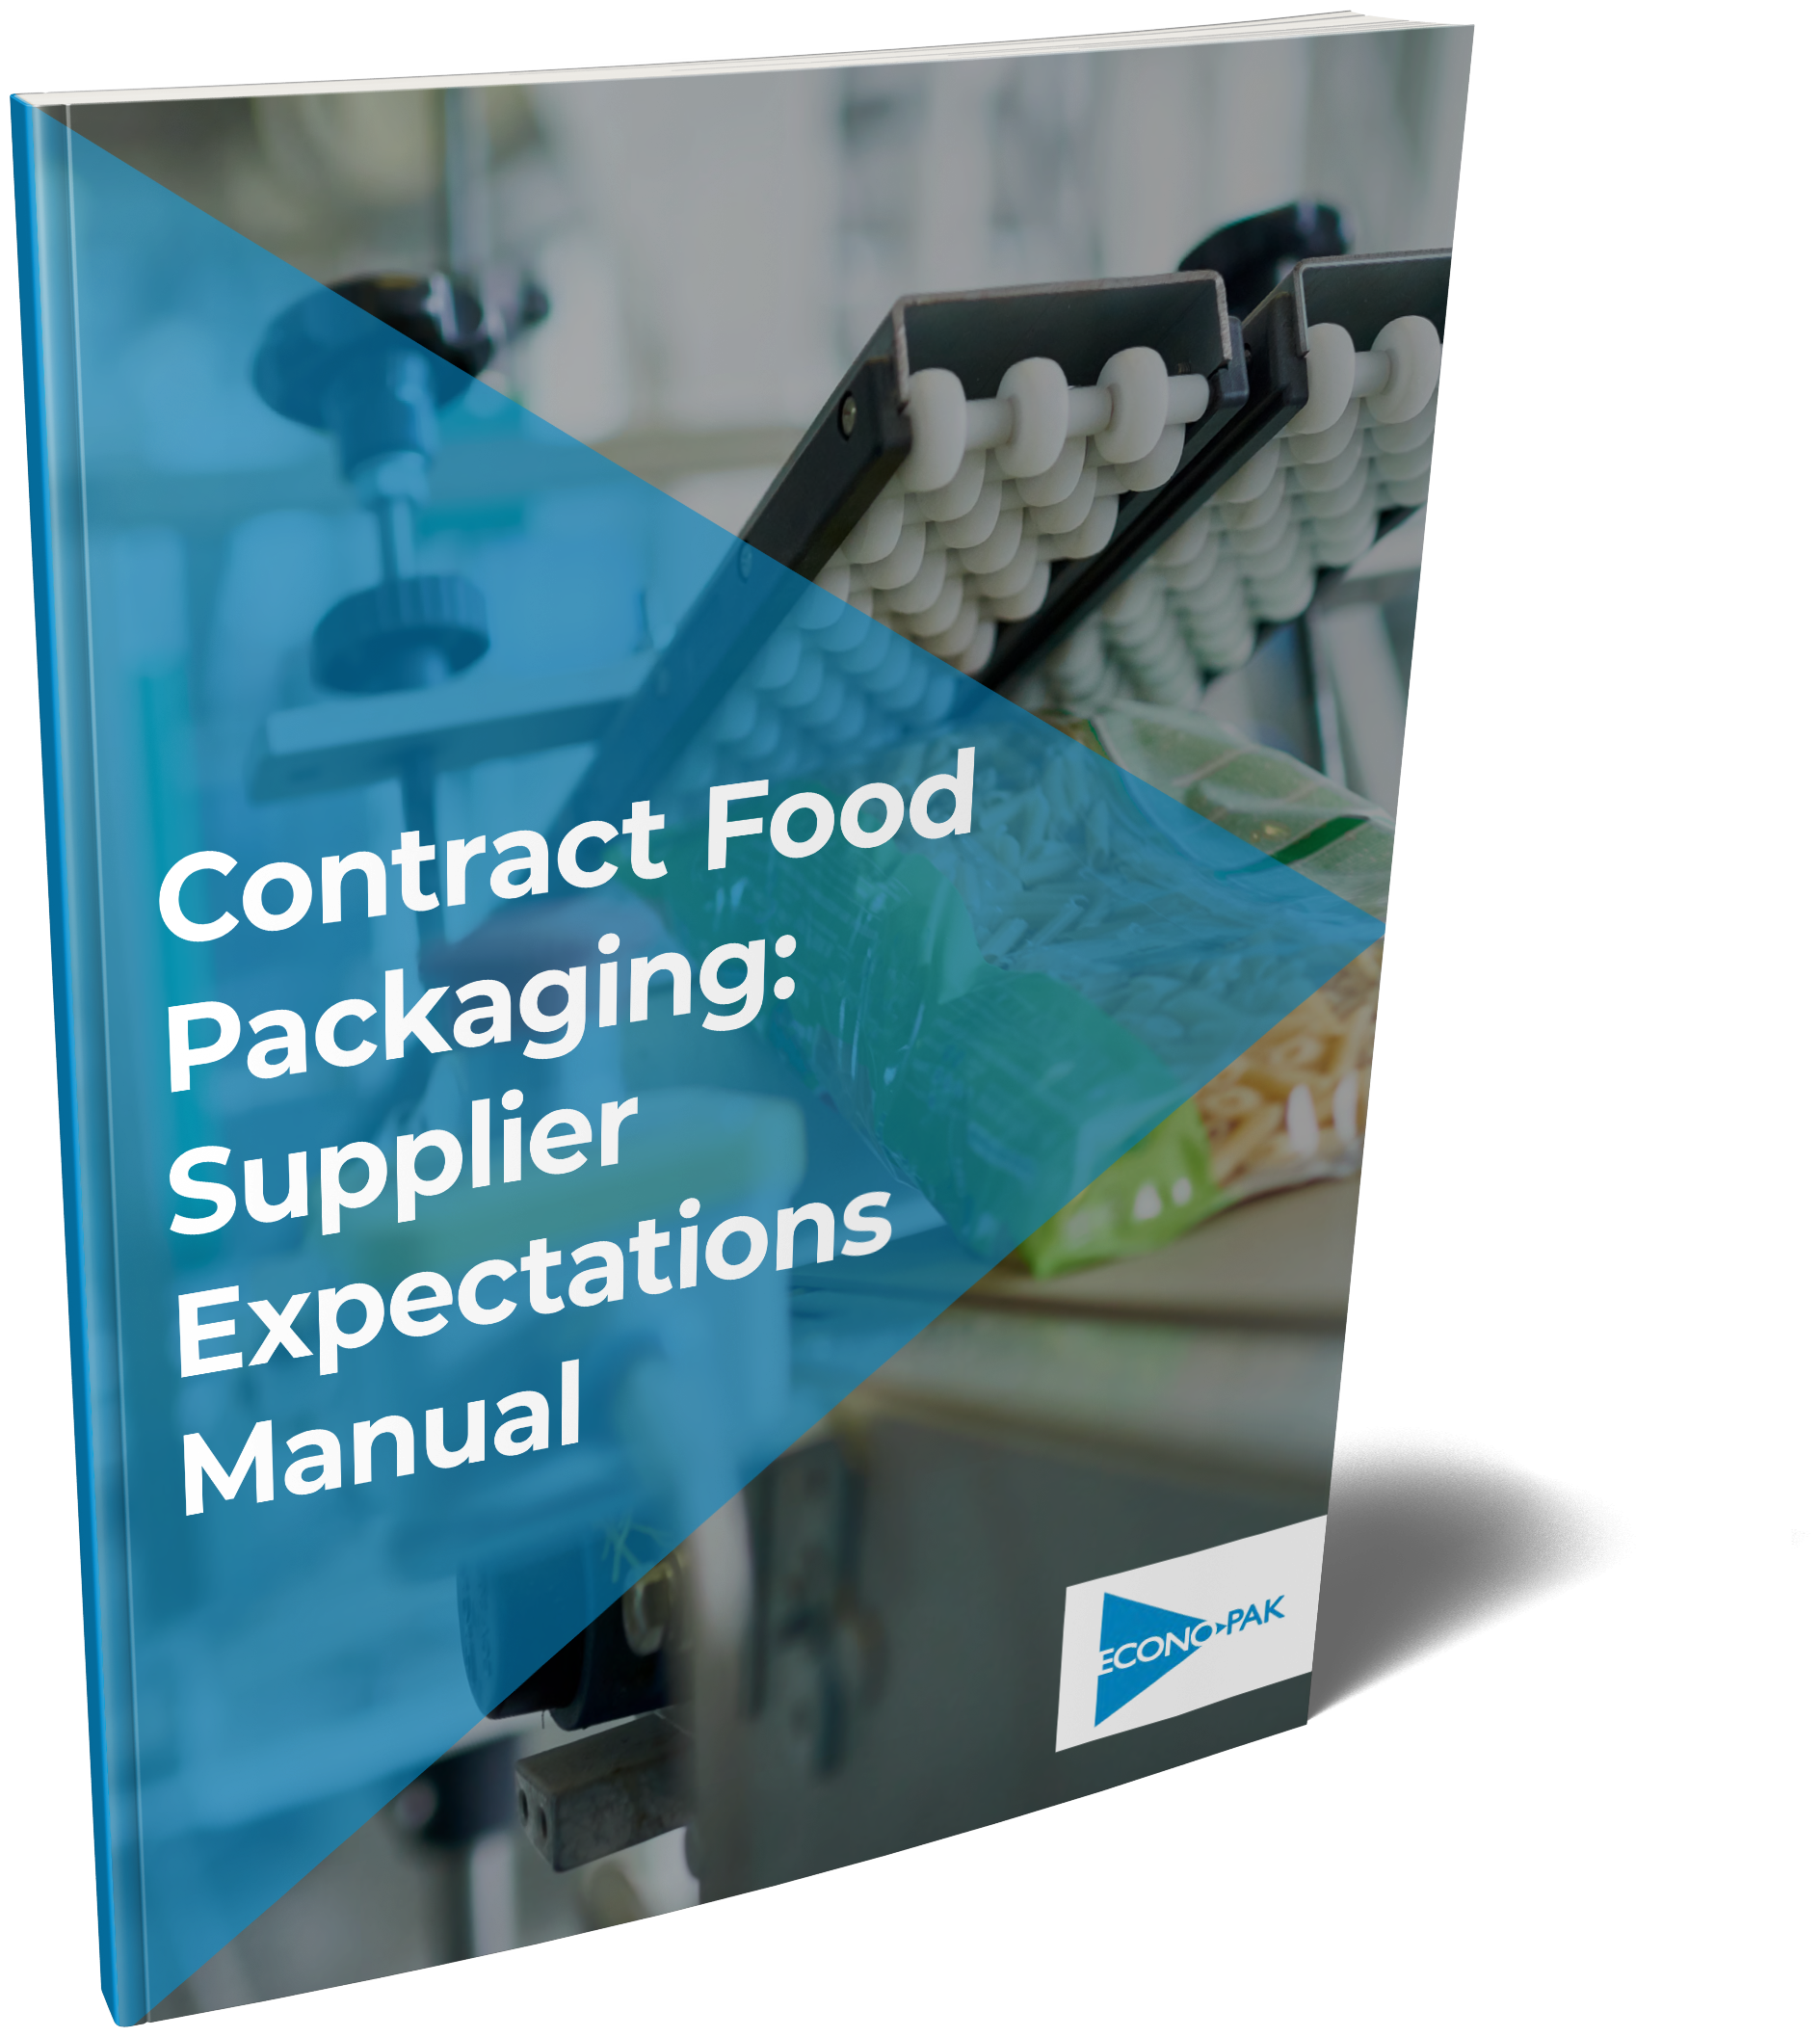 Contract-Food-Packaging-1